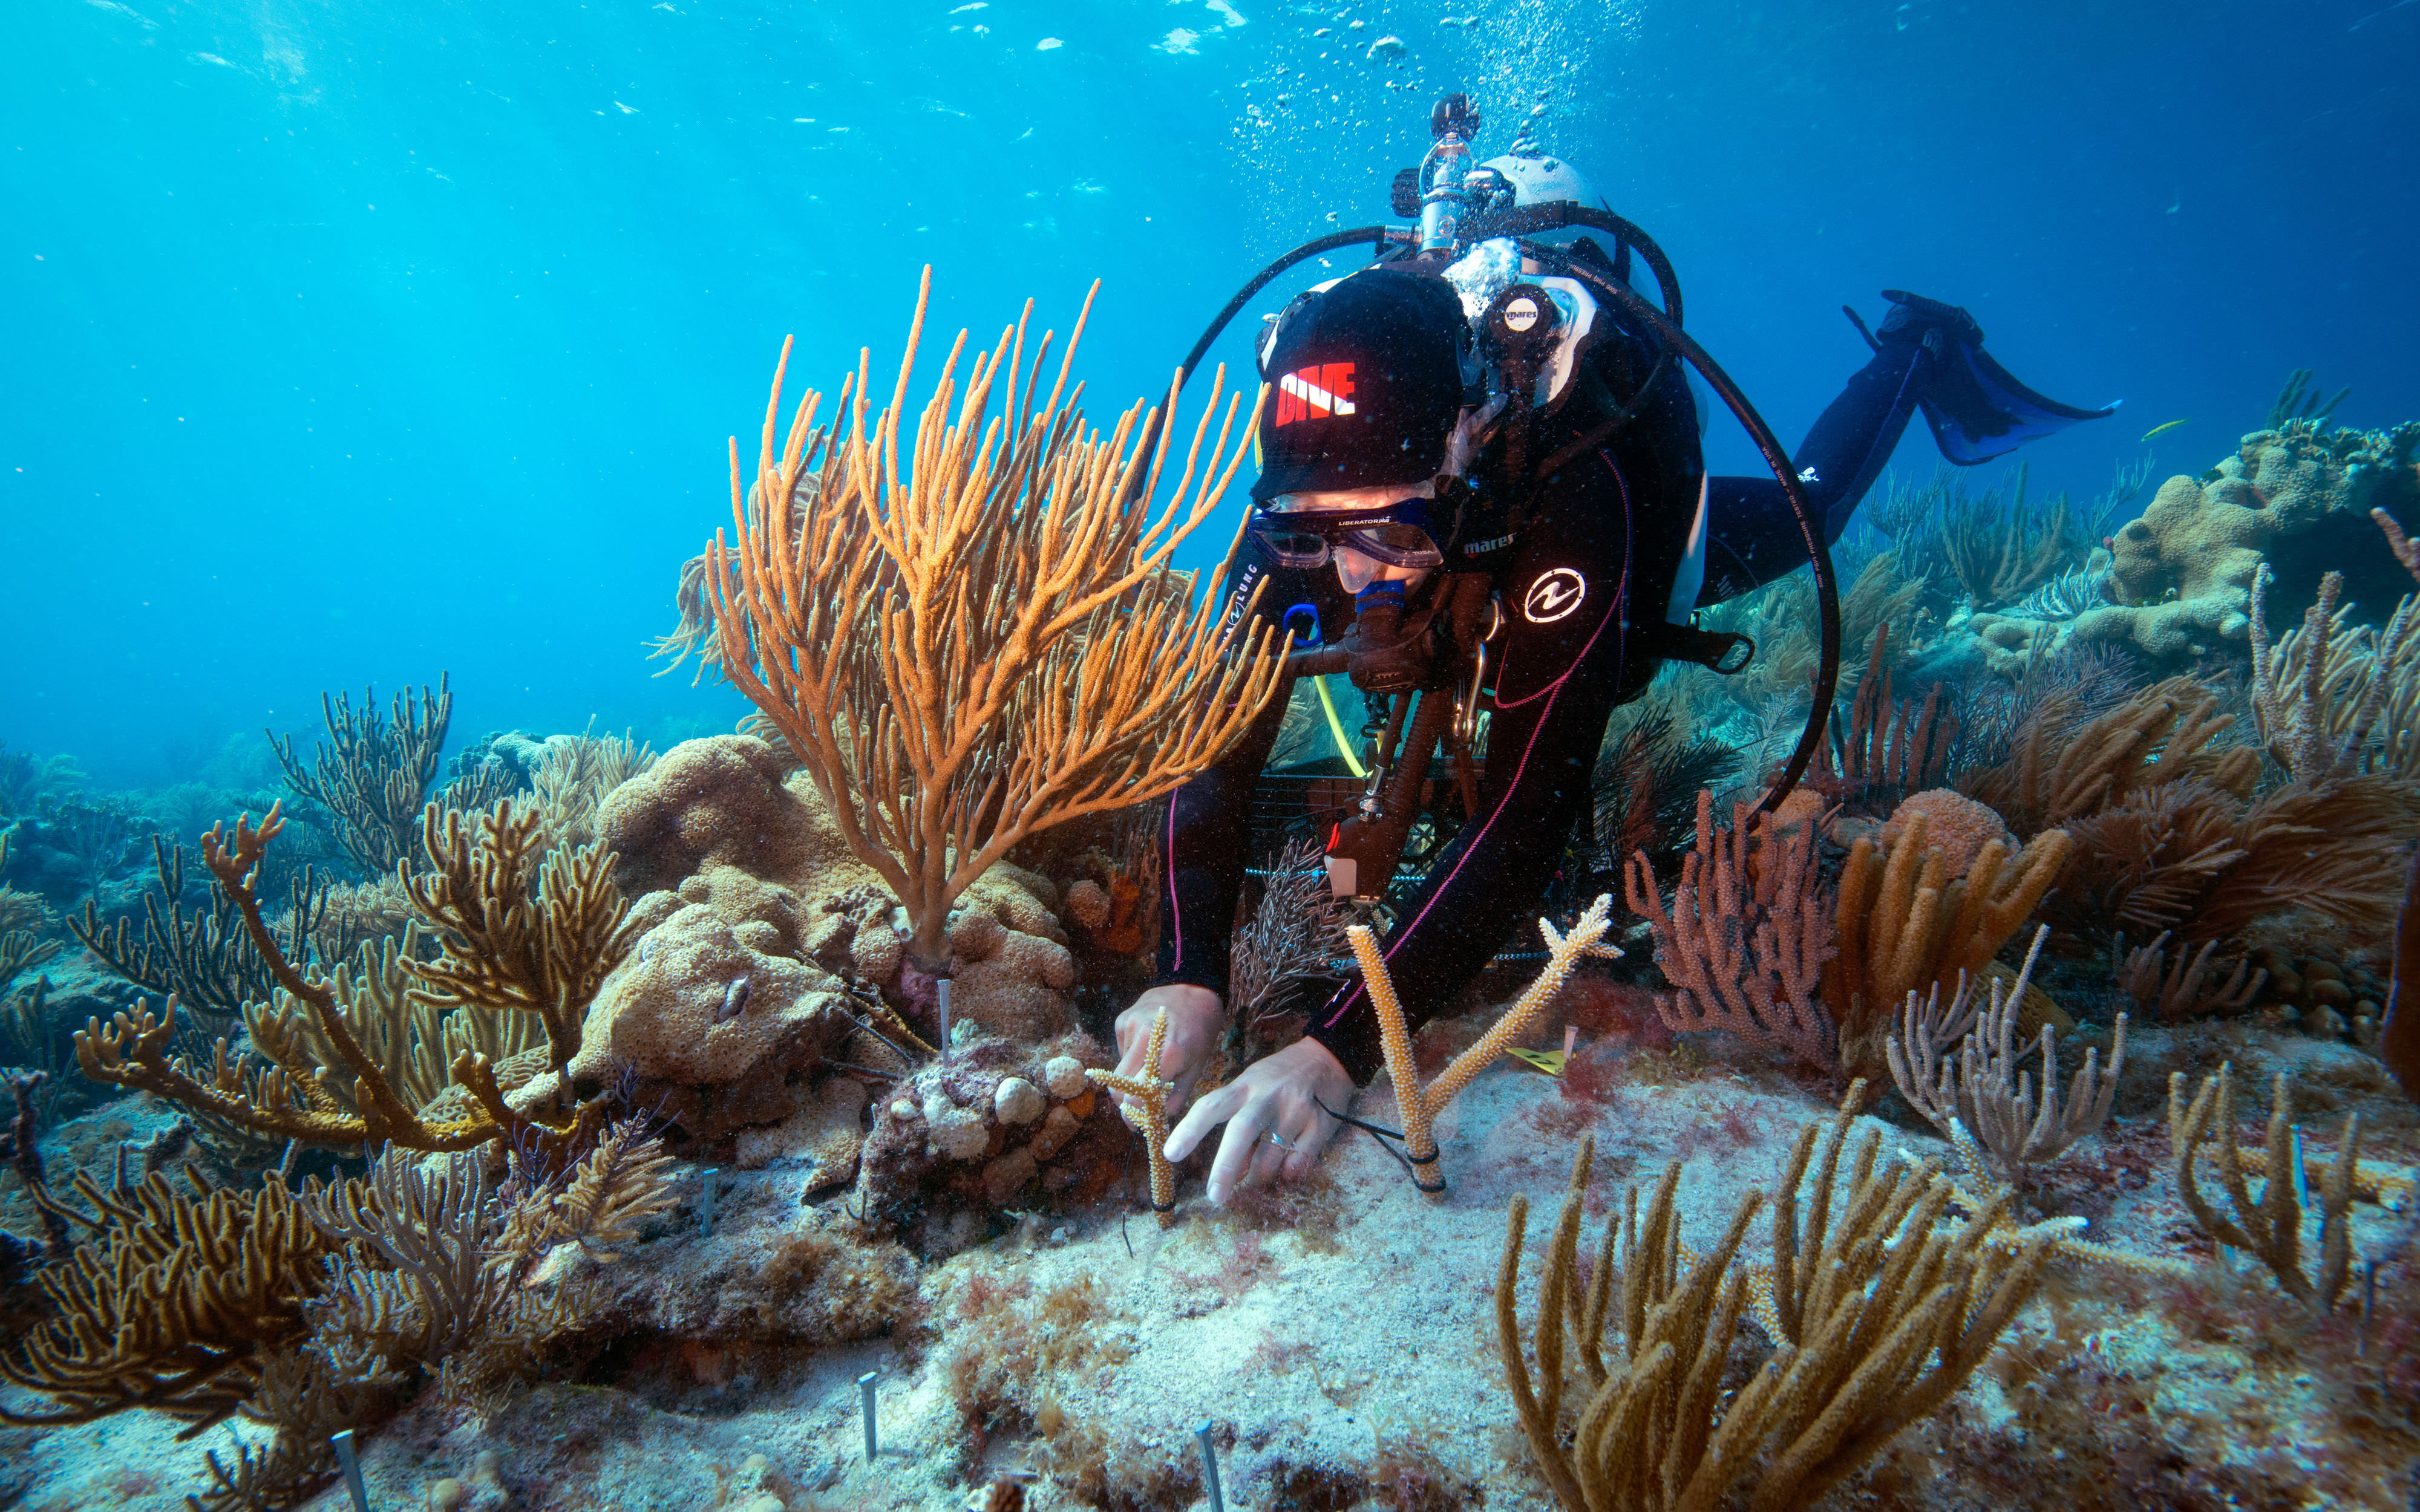 A scuba diver planting a coral reef fragment back onto a reef section.